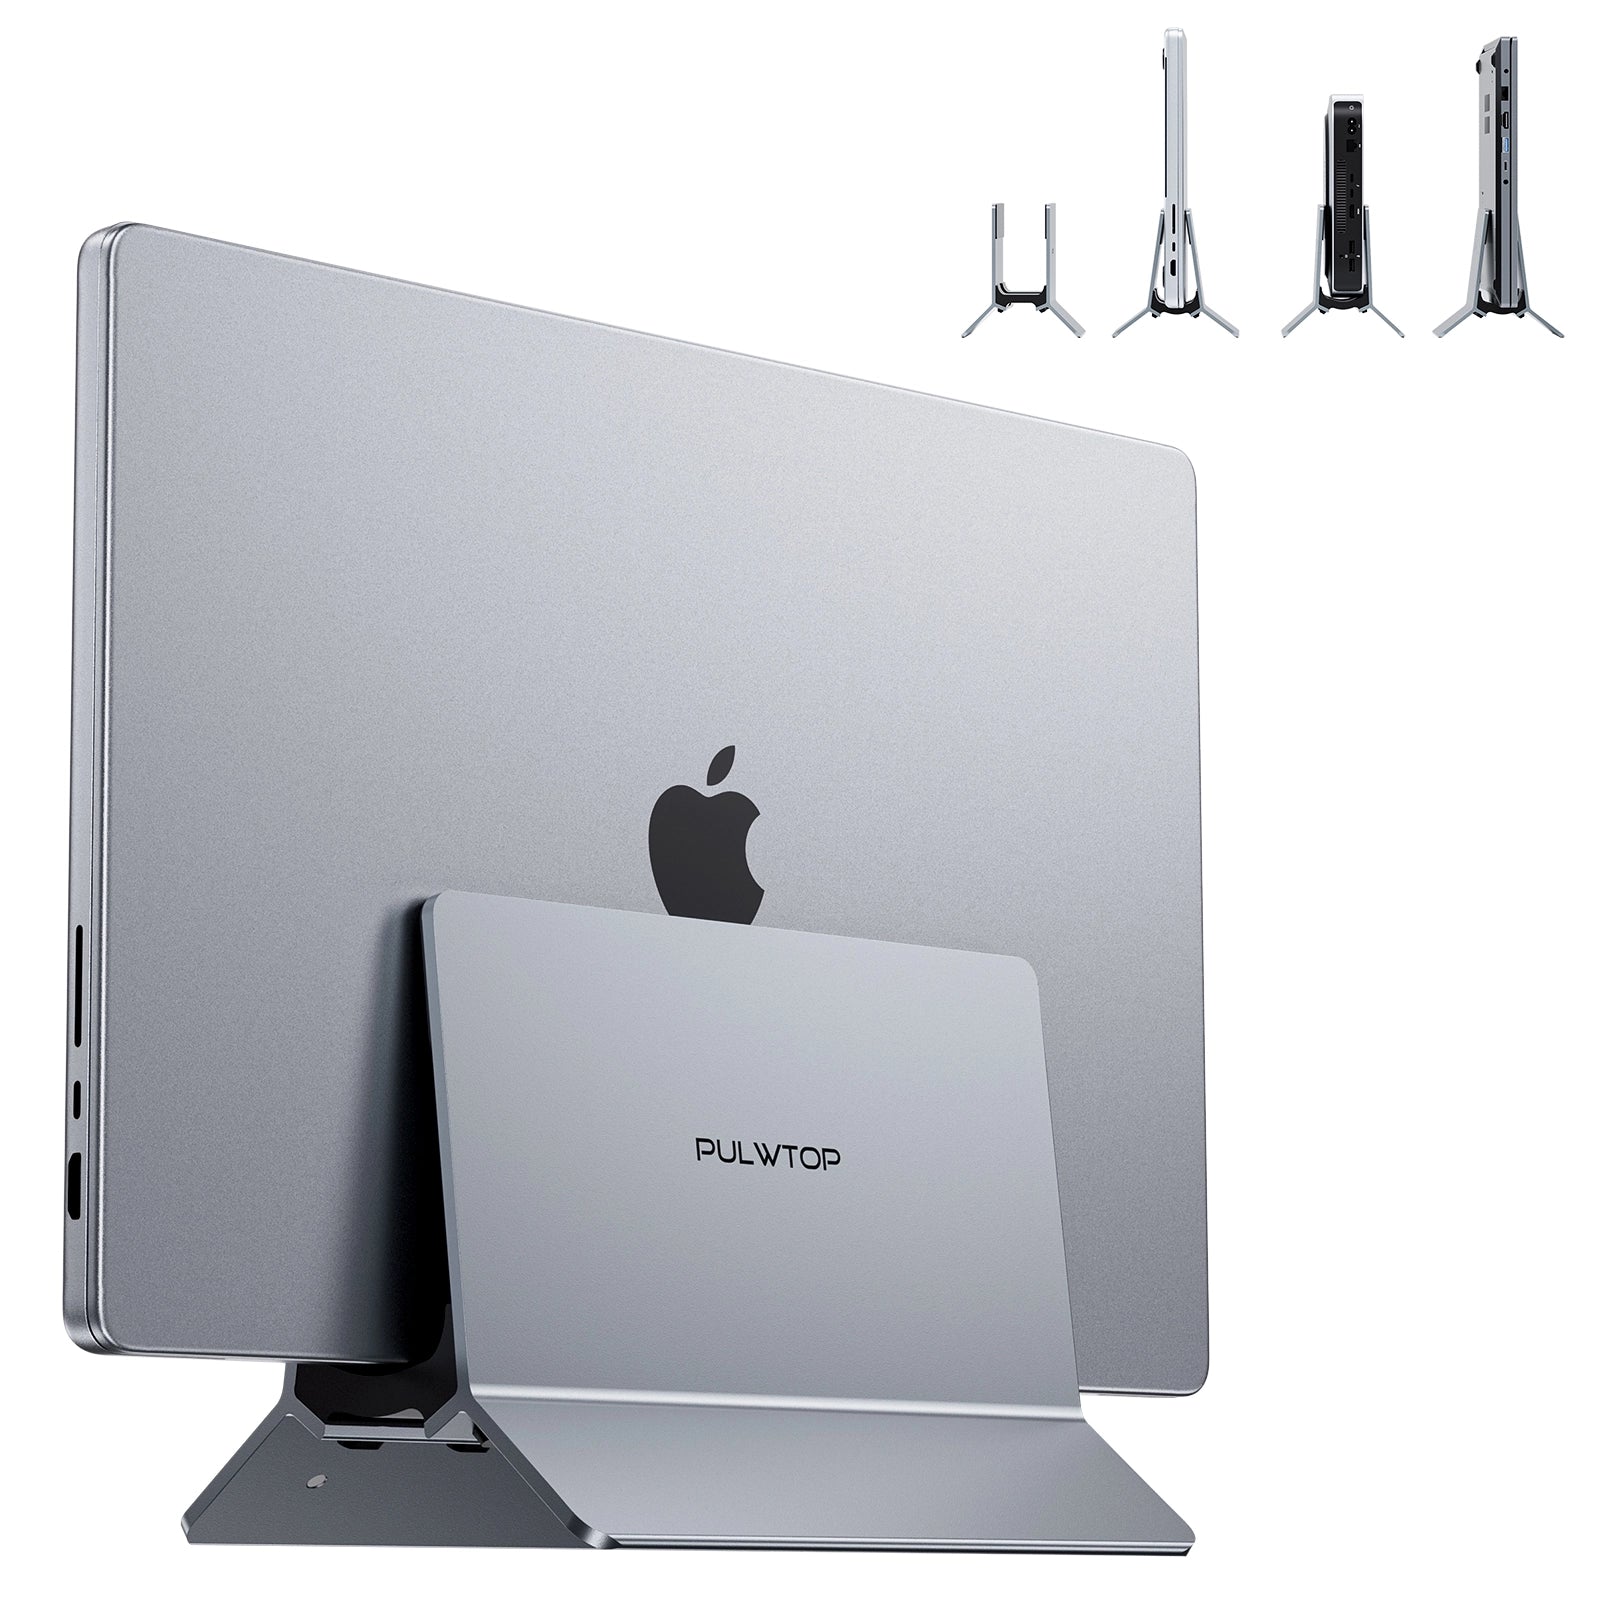 PULWTOP Vertical Laptop Stand, Laptop Stand Compatible with MacBook Air & Pro, Mac Mini, iPad, and other any laptops, Desk Stand Aluminum macbook stand